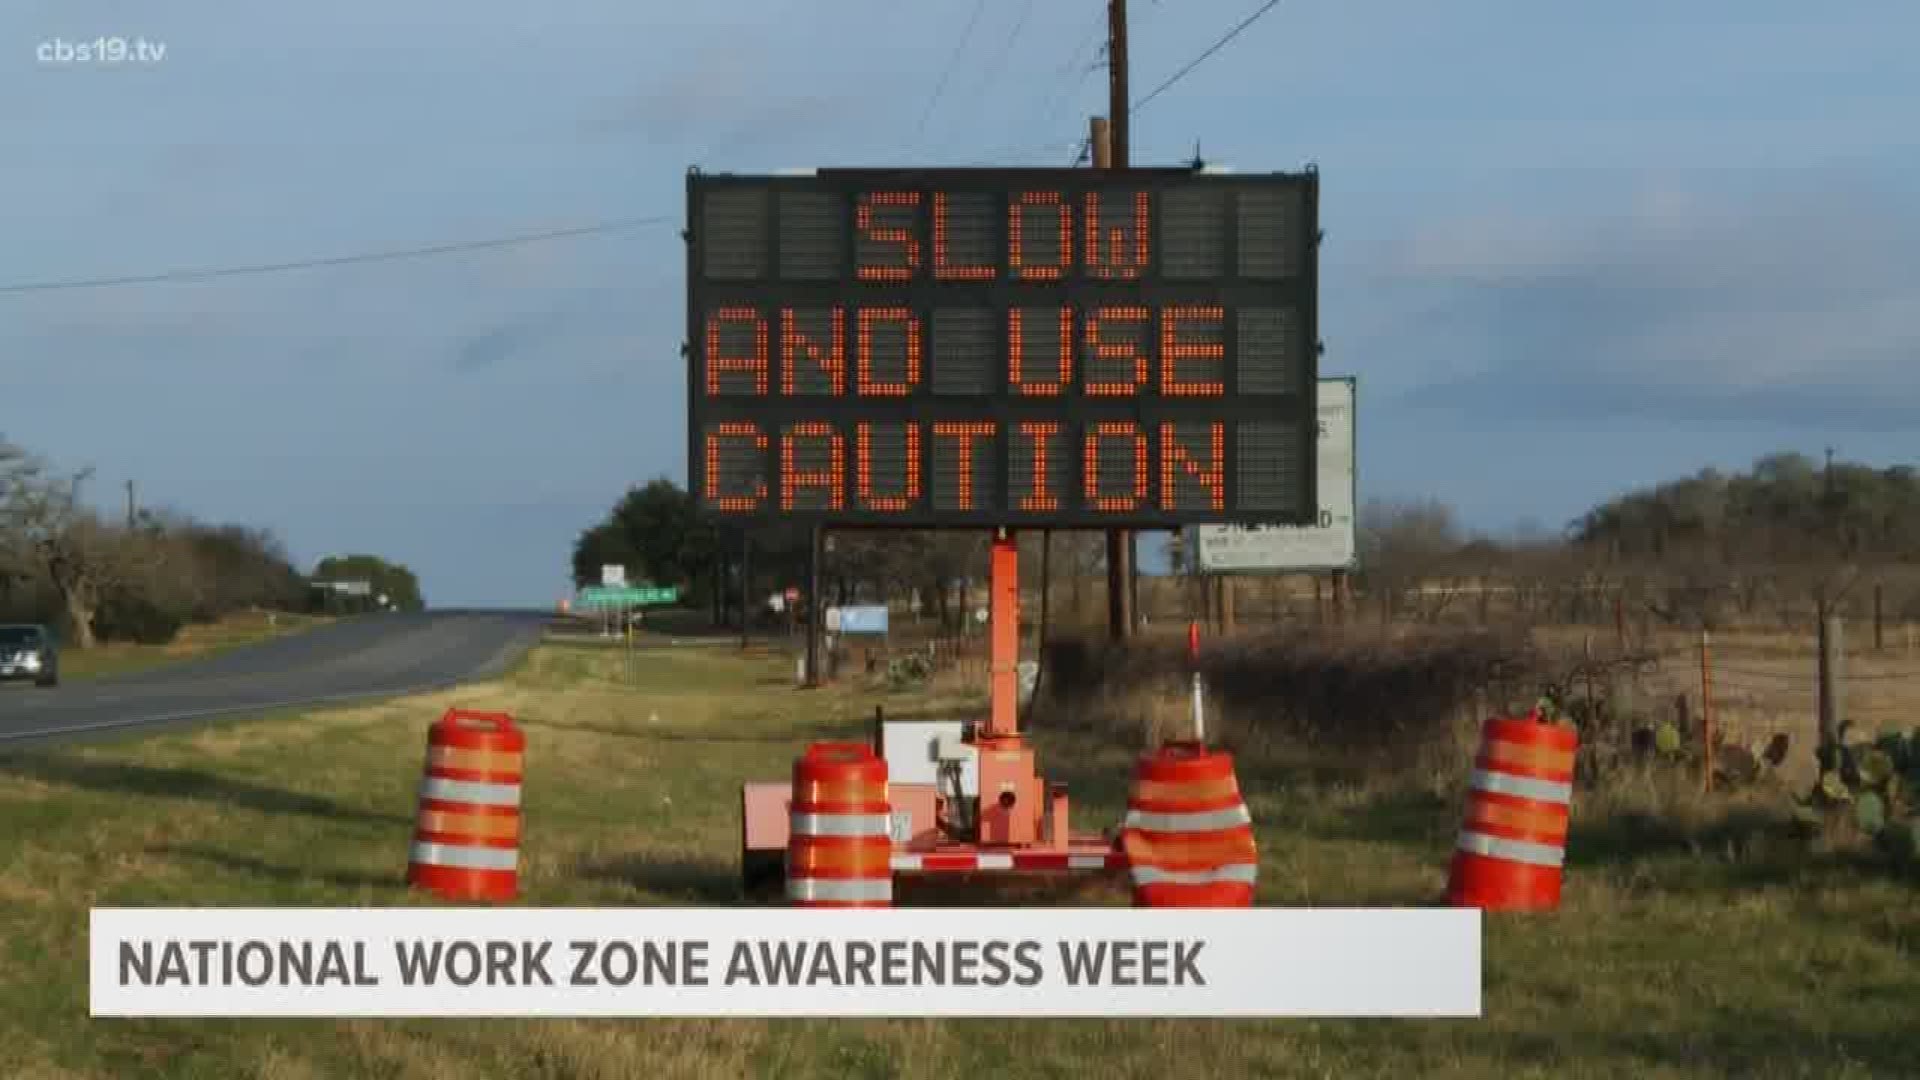 All week the Federal Highway Administration has been promoting National Work Zone Awareness Week to bring attention to safe driving around roadside work zones.